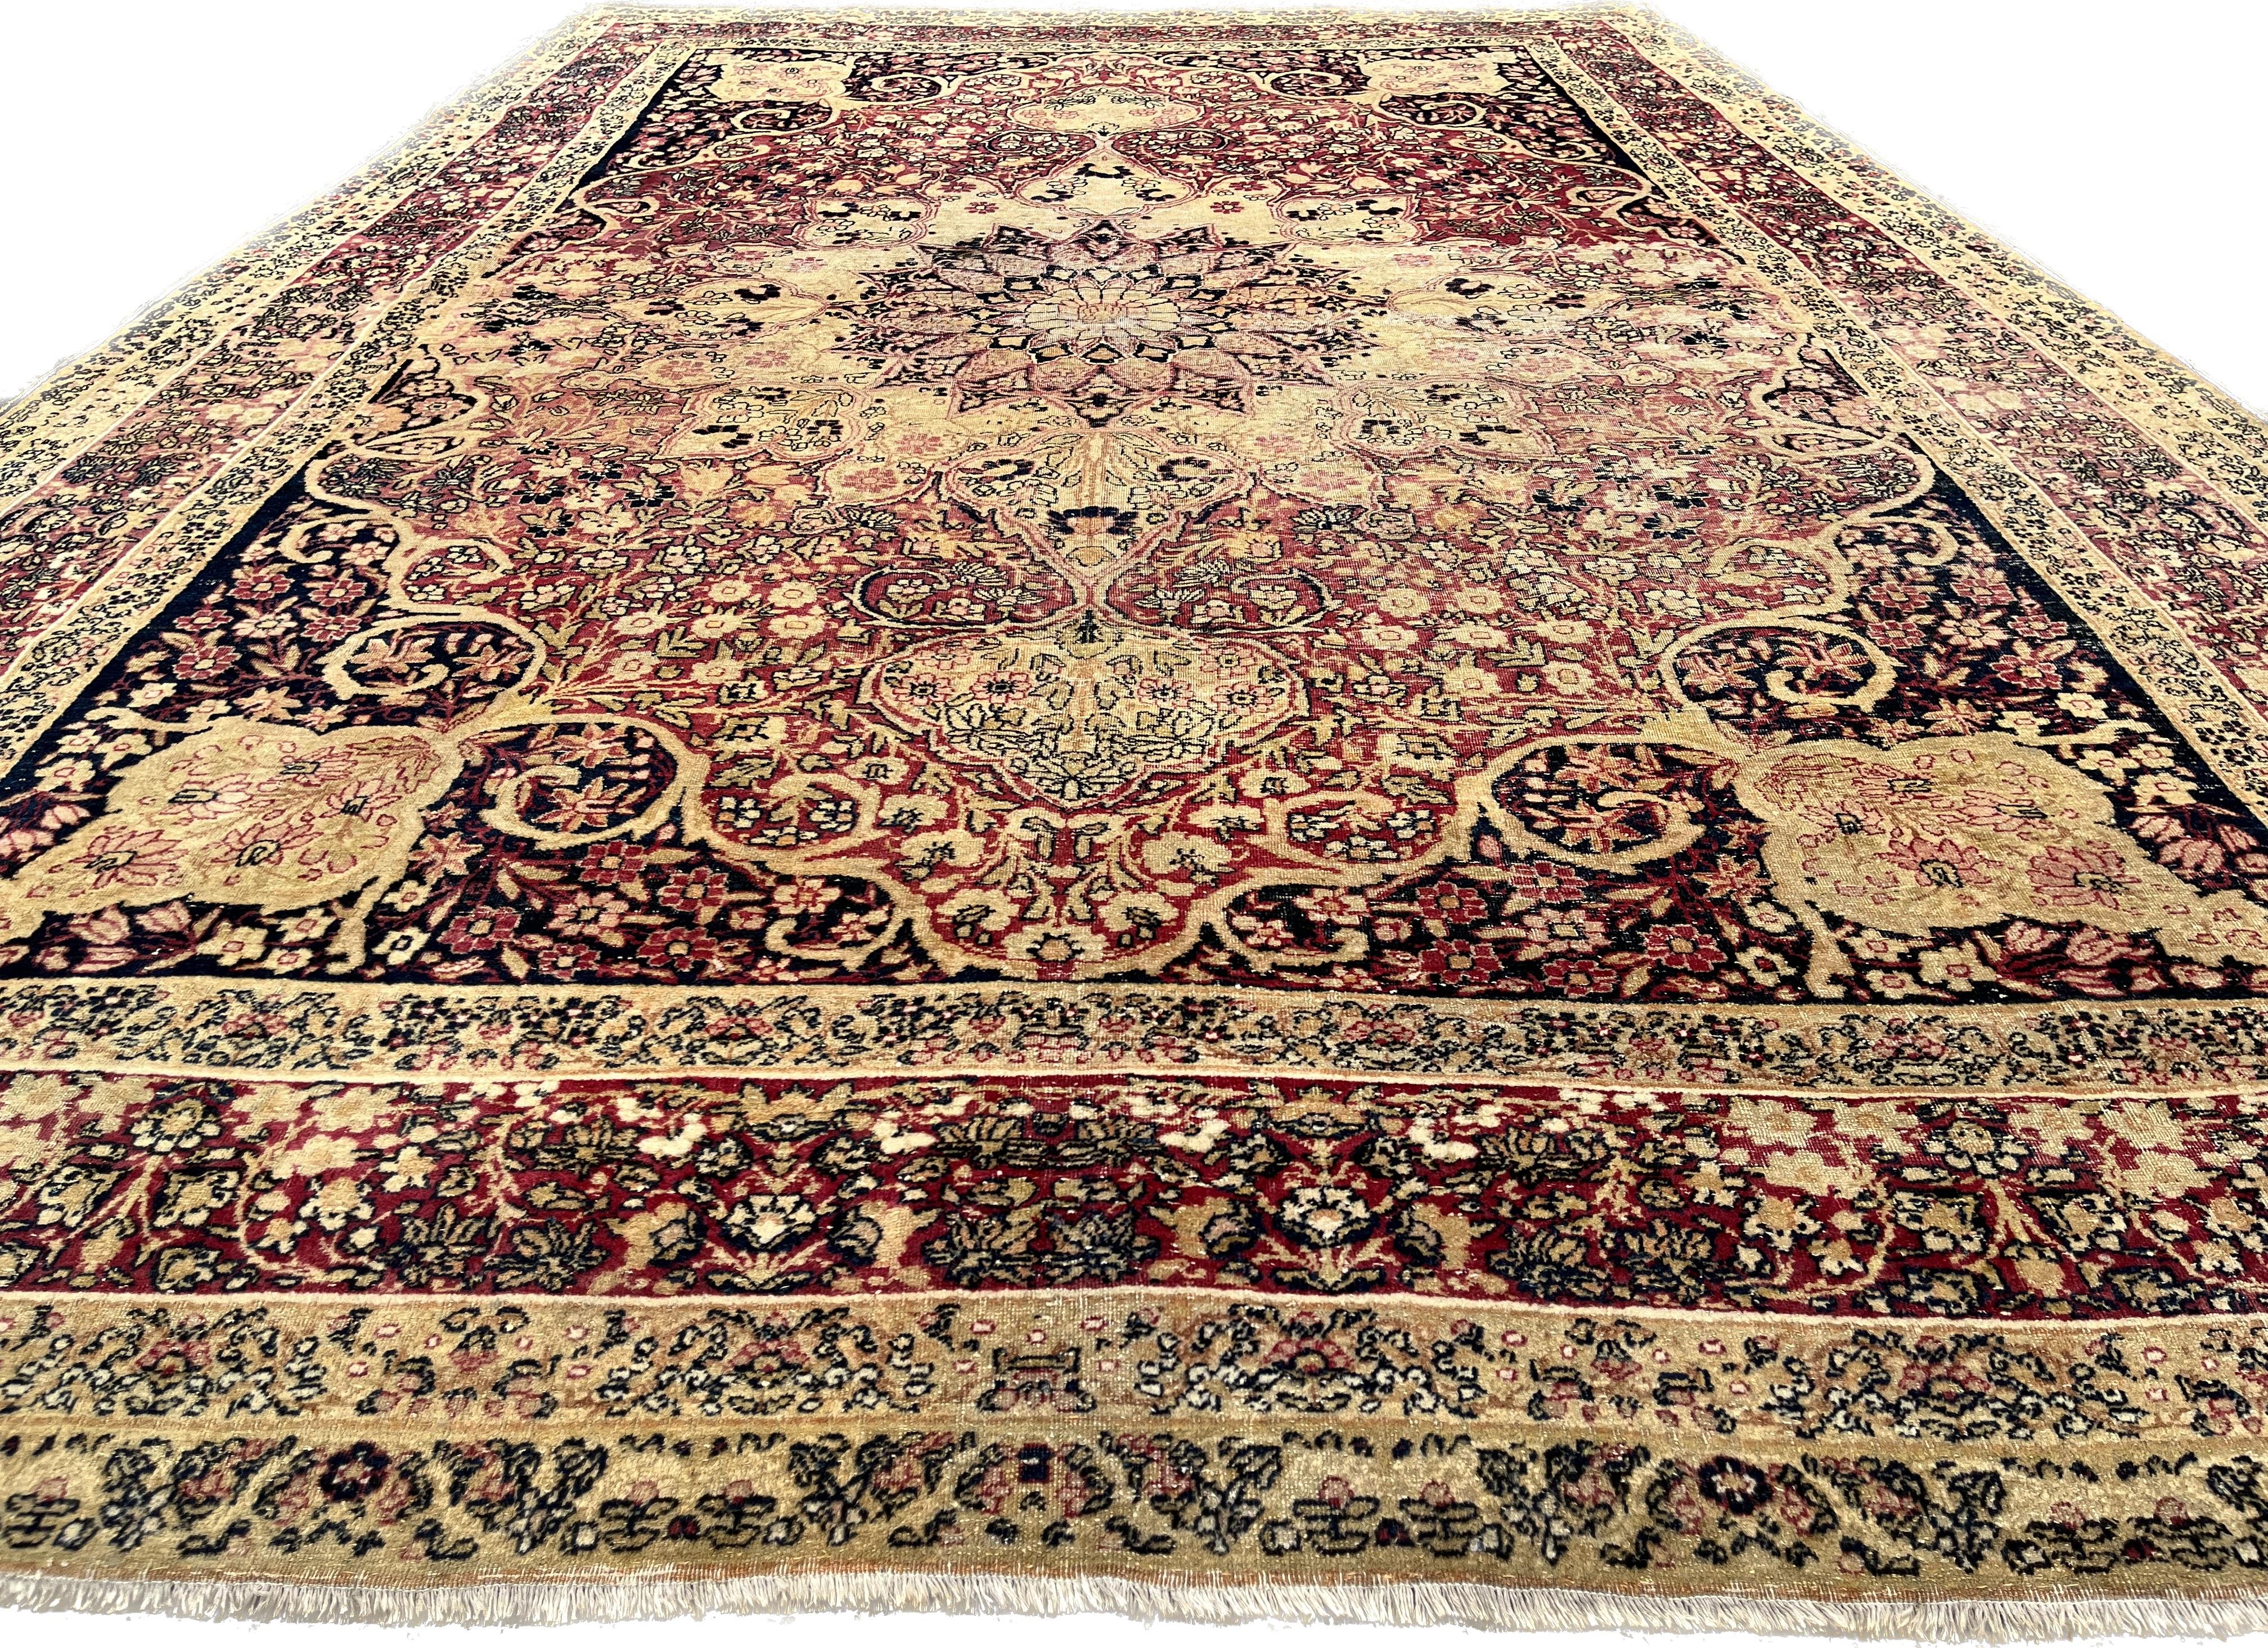 Antique Kirman Laver (Raver) Late. 19th
Magnificent Kerman carpet known as Laver, circa 1880. Coming from a castle in Agenais.

Kerman is the largest city in southeastern Iran. It is the capital of the province of Kerman.
The deep harmony of colors